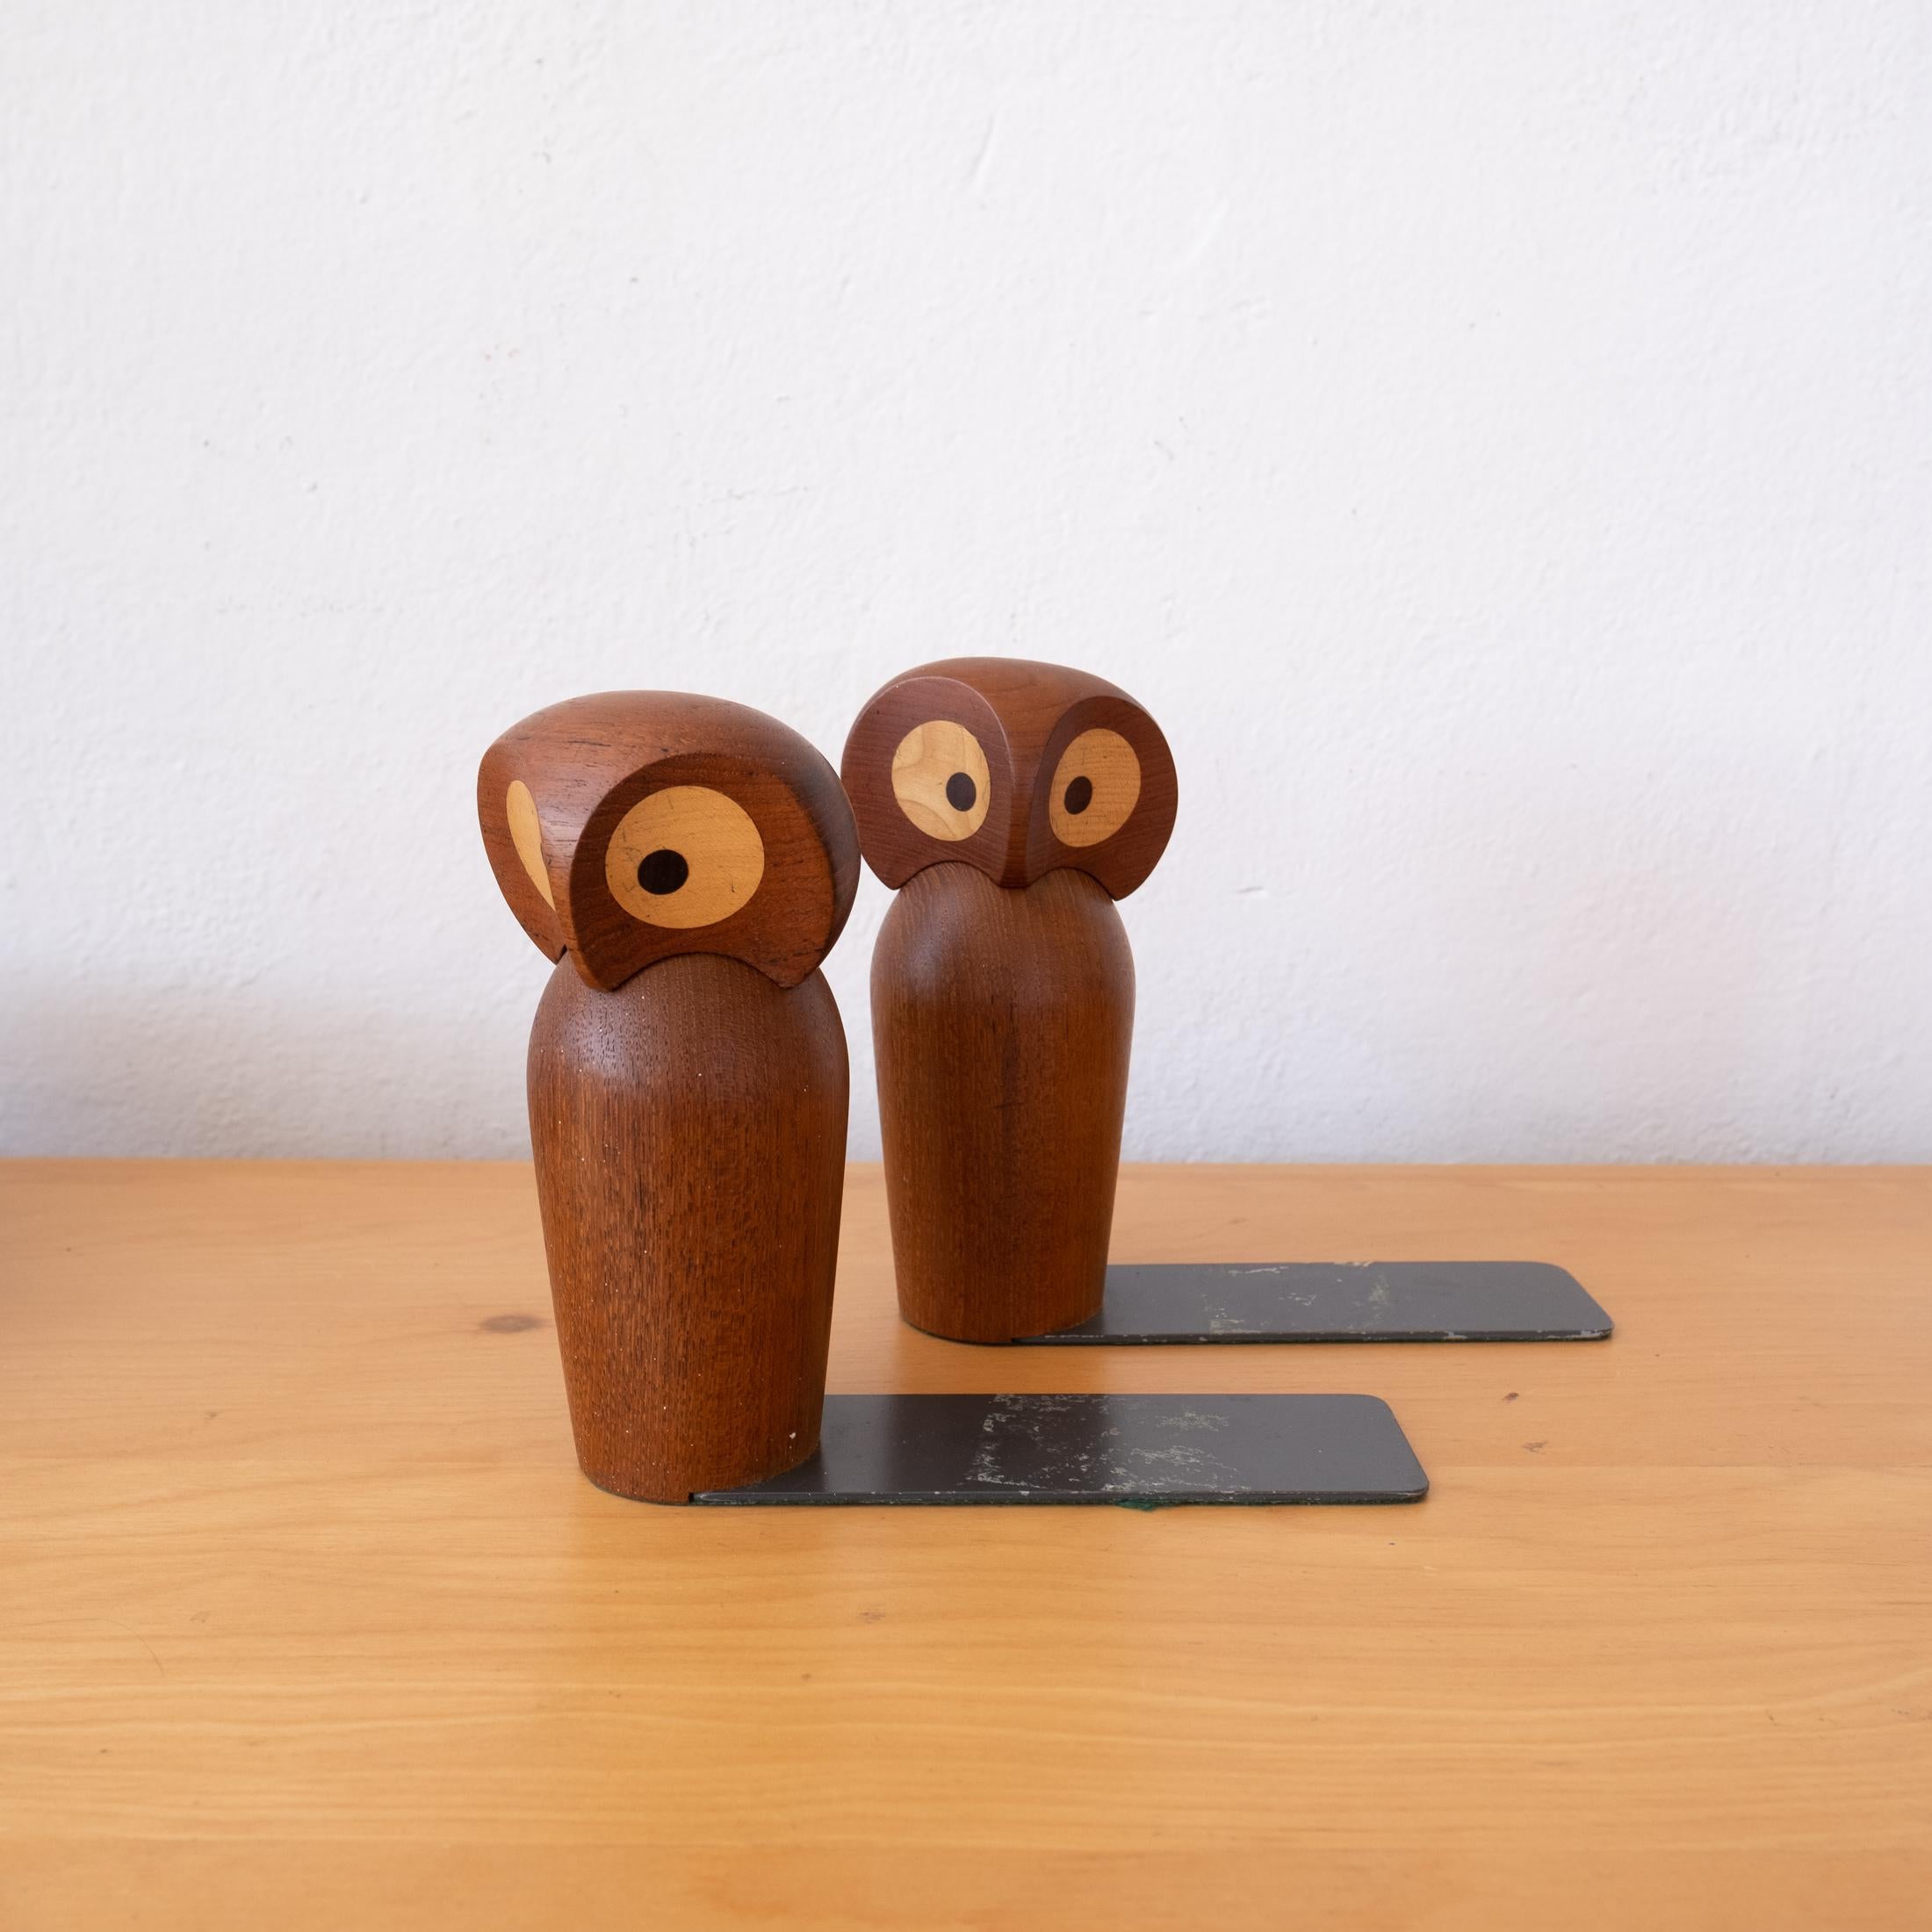 Rare pair of teak owl bookends made by Skjode Skjern. Finely crafted with mixed wood. Posable heads. Denmark, 1950s